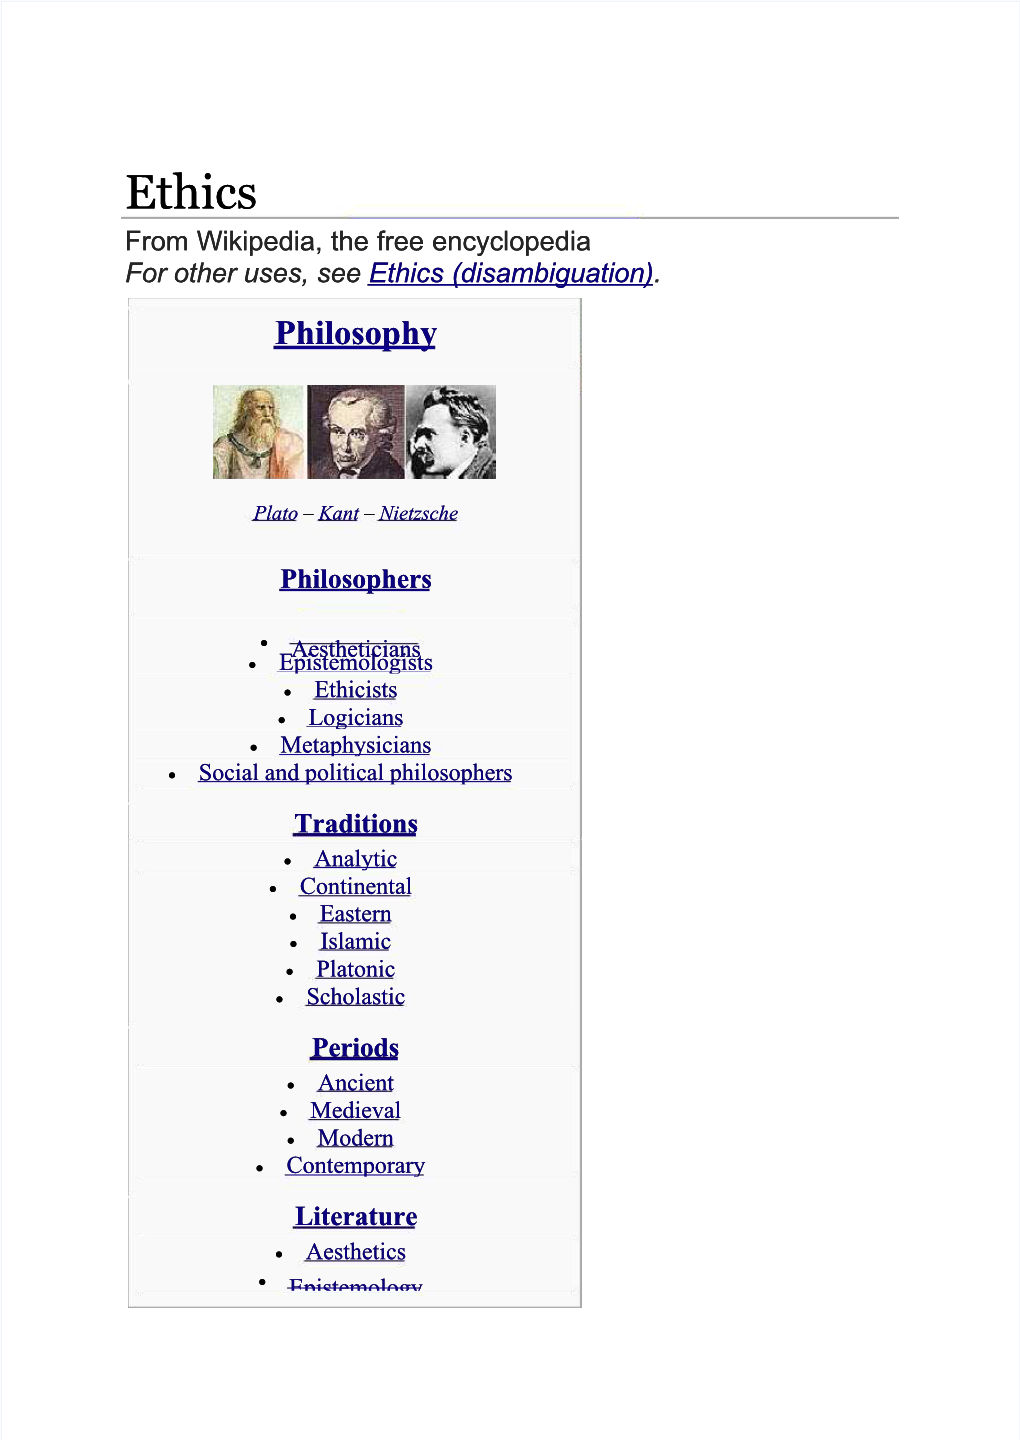 Ethics from Wikipedia, the Free Encyclopedia for Other Uses, See Ethics (Disambiguation)